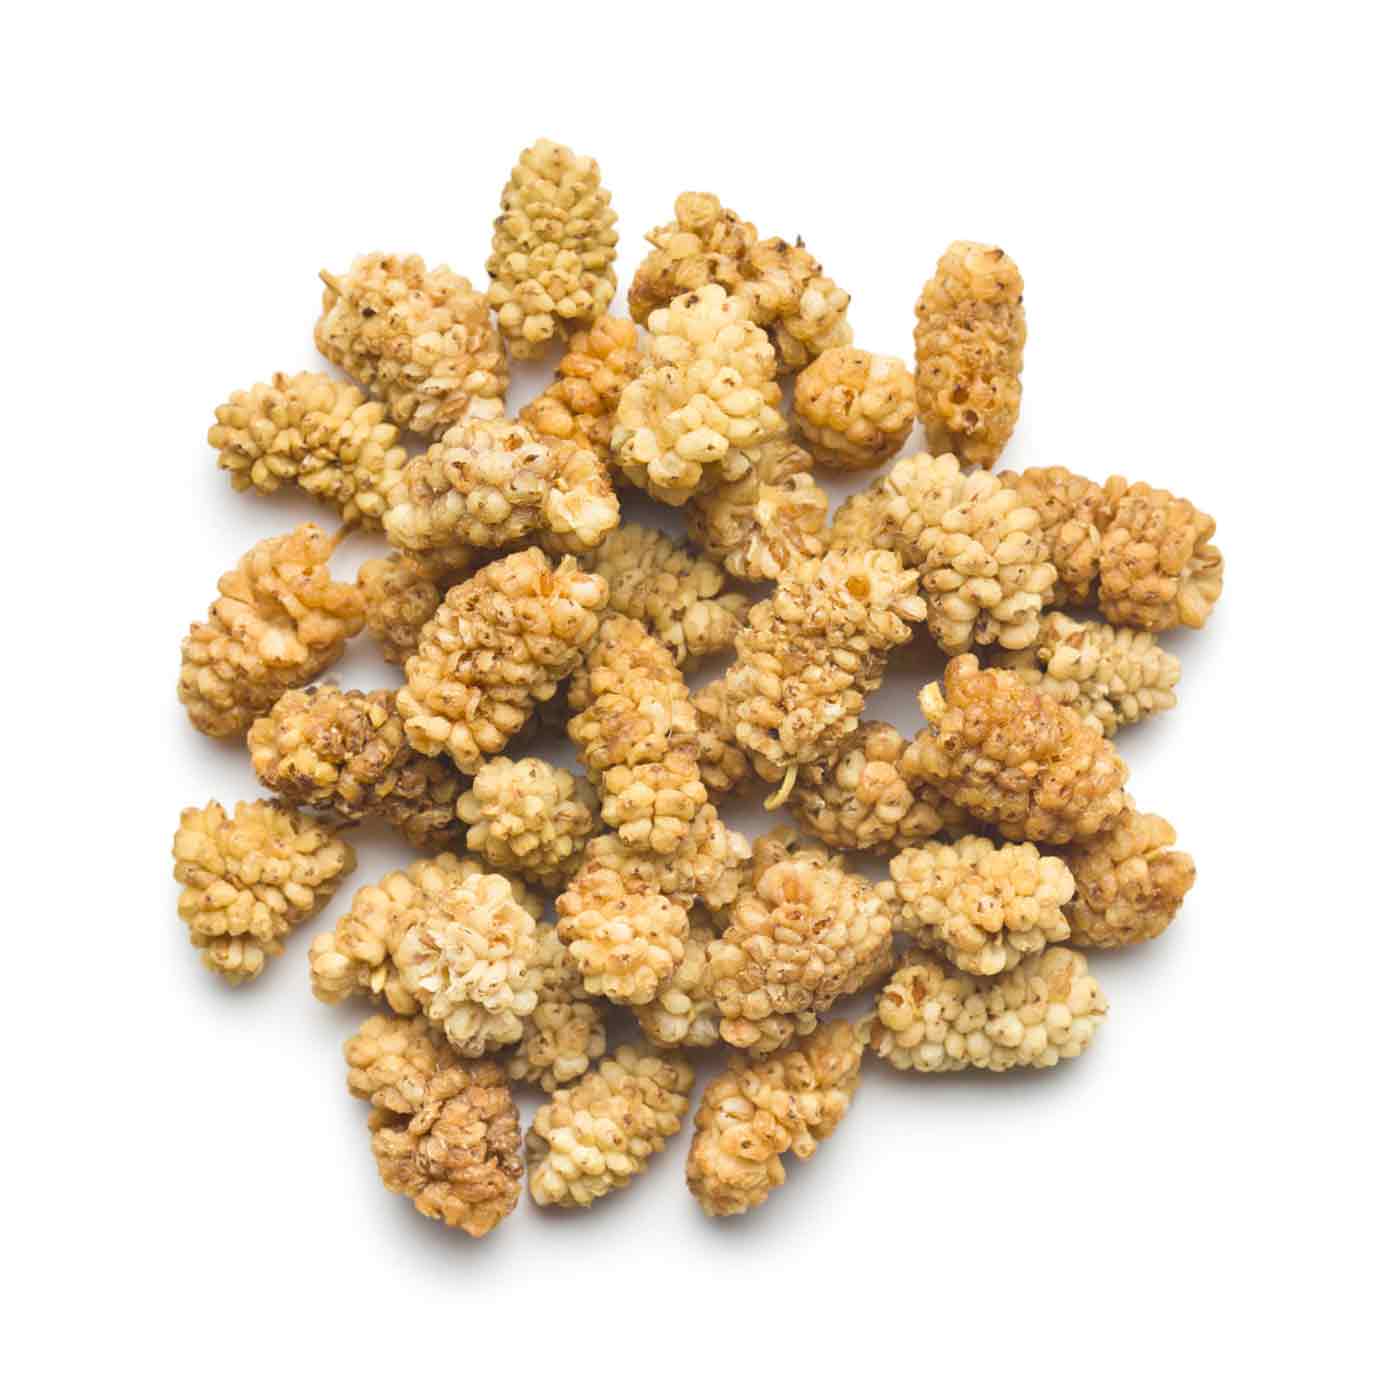 Mulberries Mures Blanches Bio amoseeds specialiste des super aliments Bio.